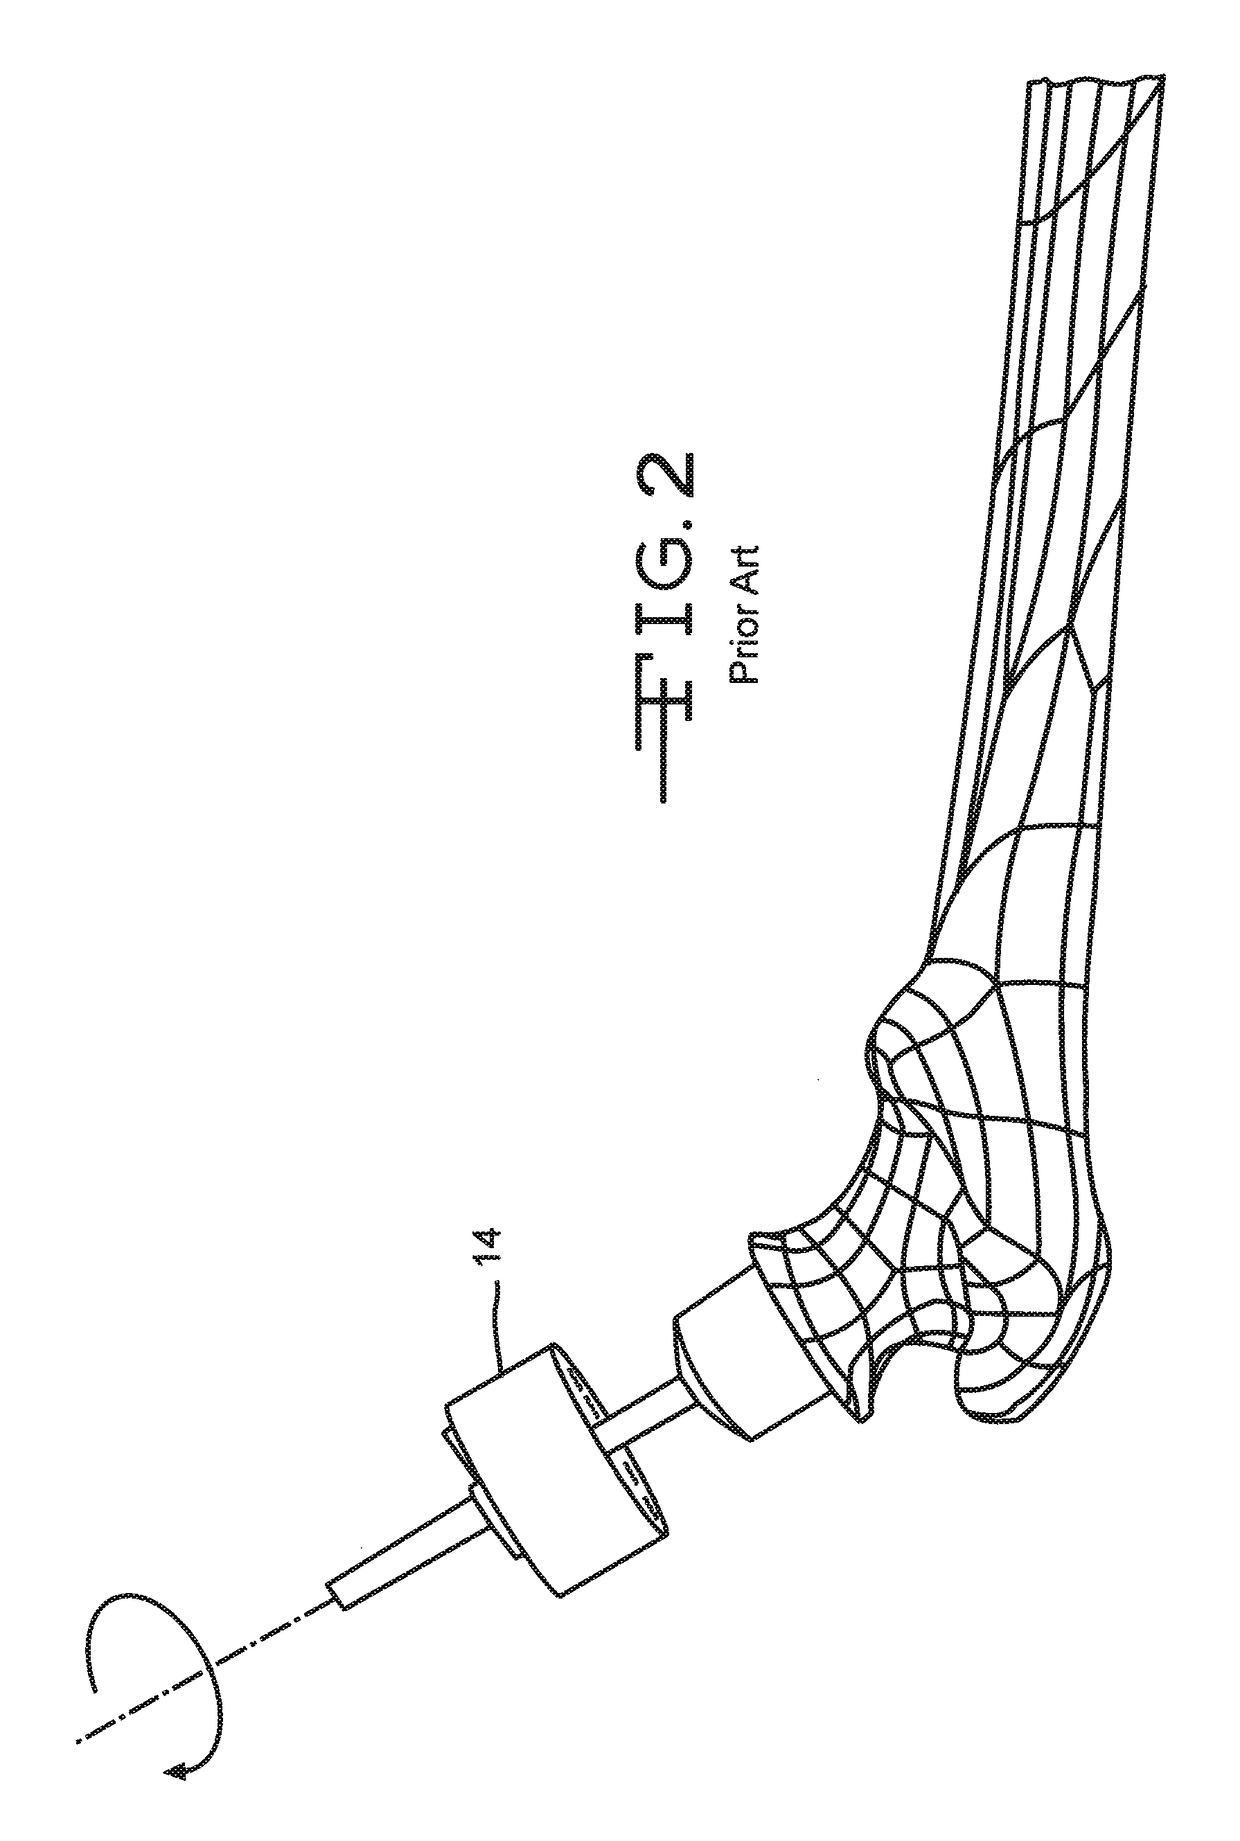 Instrument for reshaping the head of a femur